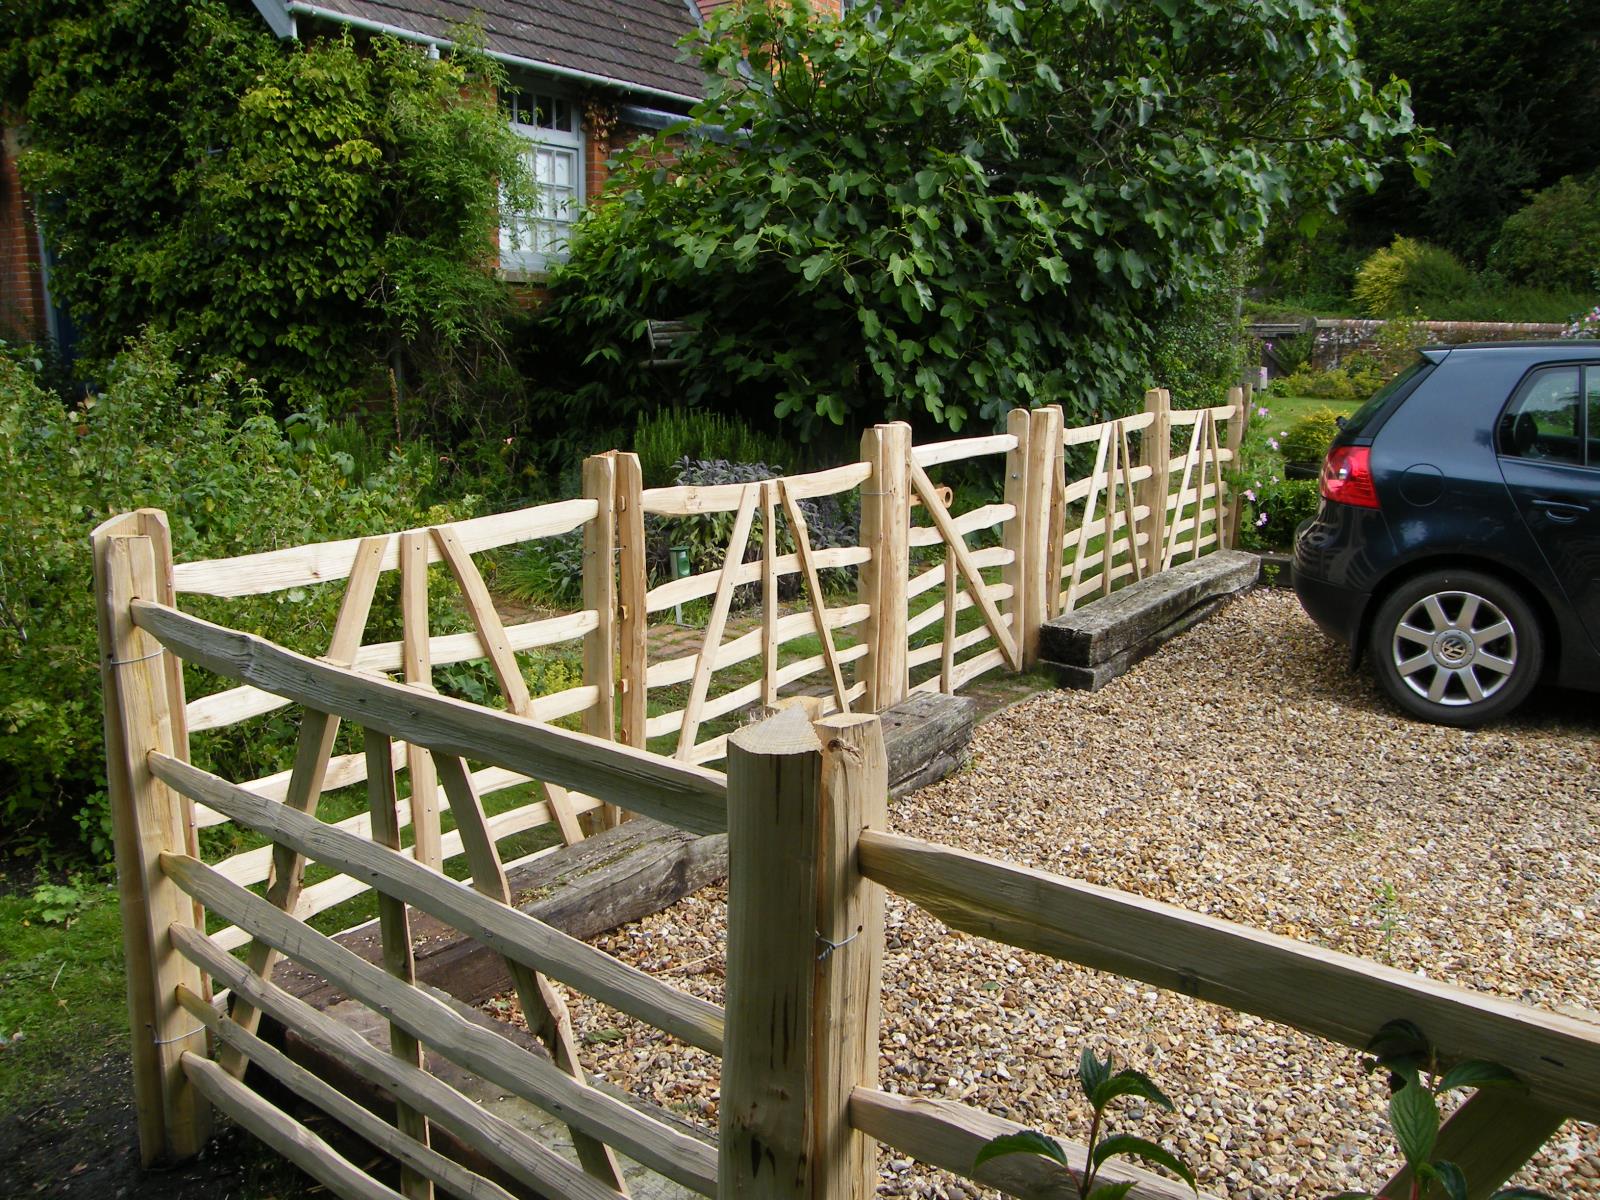 wooden fencing by fence makers, Wiltshire